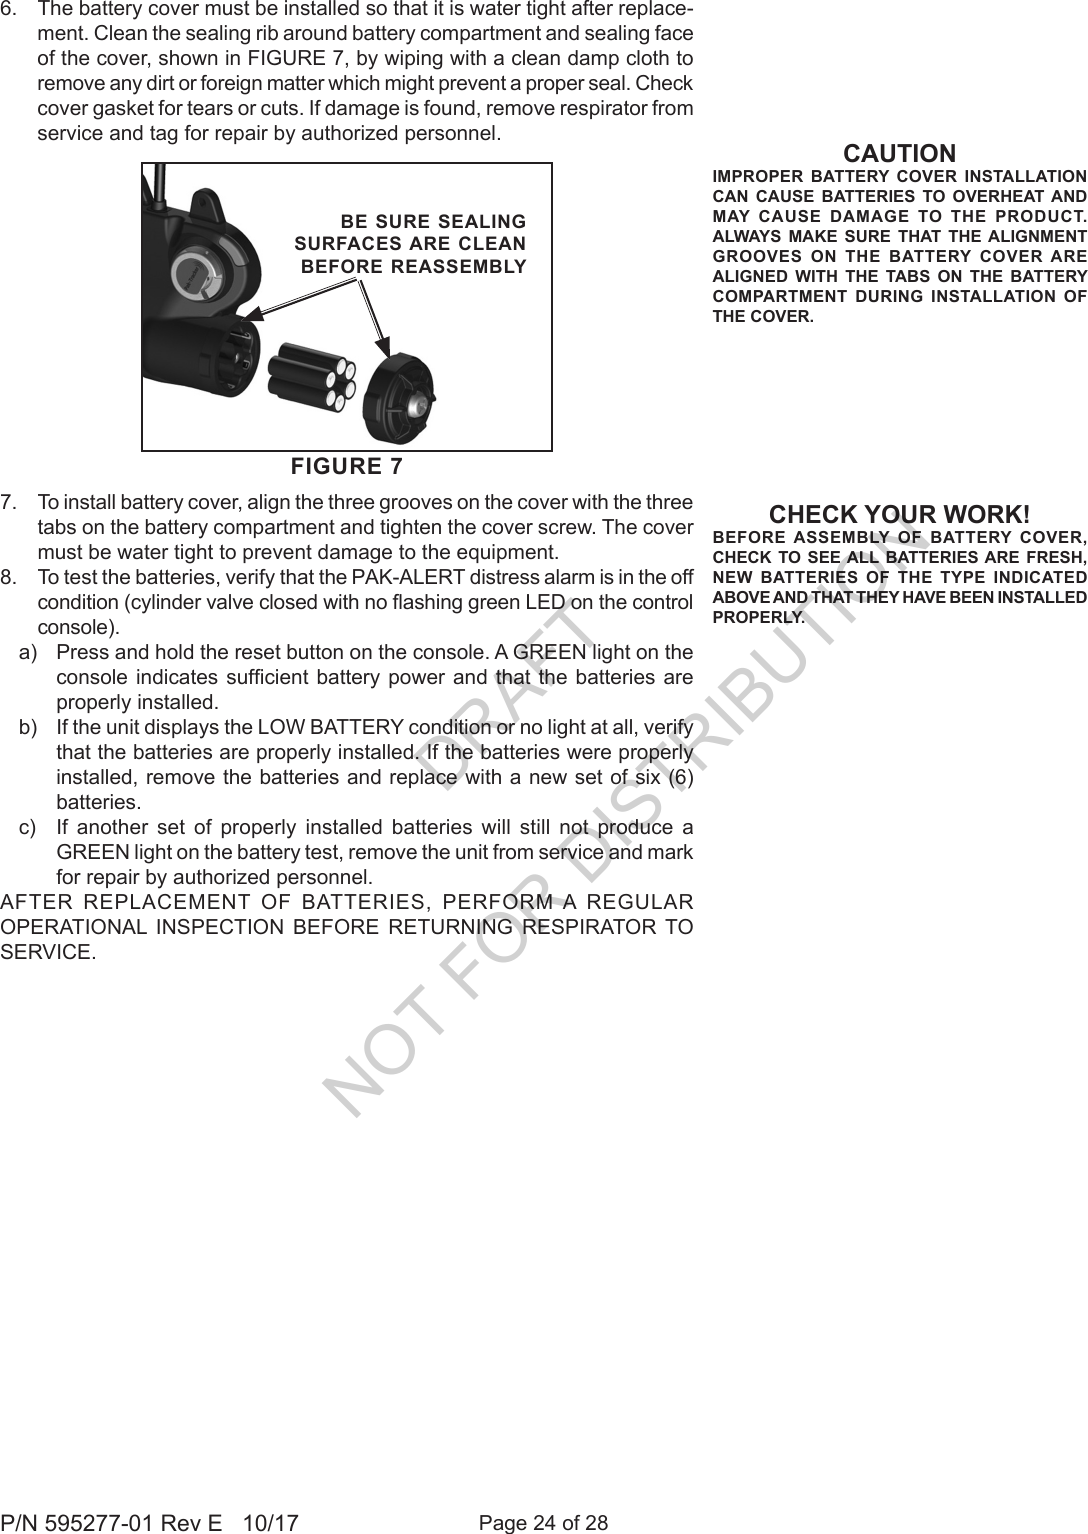 Page 24 of 28P/N 595277-01 Rev E   10/17CHECK YOUR WORK!BEFORE ASSEMBLY OF BATTERY COVER, CHECK TO SEE ALL BATTERIES ARE FRESH, NEW BATTERIES OF THE TYPE INDICATED ABOVE AND THAT THEY HAVE BEEN INSTALLED PROPERLY.FIGURE 7BE SURE SEALING SURFACES ARE CLEAN BEFORE REASSEMBLY6.  The battery cover must be installed so that it is water tight after replace-ment. Clean the sealing rib around battery compartment and sealing face of the cover, shown in FIGURE 7, by wiping with a clean damp cloth to remove any dirt or foreign matter which might prevent a proper seal. Check cover gasket for tears or cuts. If damage is found, remove respirator from service and tag for repair by authorized personnel. 7.  To install battery cover, align the three grooves on the cover with the three tabs on the battery compartment and tighten the cover screw. The cover must be water tight to prevent damage to the equipment.8.  To test the batteries, verify that the PAK-ALERT distress alarm is in the off condition (cylinder valve closed with no ashing green LED on the control console). a)  Press and hold the reset button on the console. A GREEN light on the console indicates  sufcient  battery power  and that the batteries  are properly installed.b)  If the unit displays the LOW BATTERY condition or no light at all, verify that the batteries are properly installed. If the batteries were properly installed, remove the batteries and replace with a new set of six (6) batteries. c)  If another set of properly installed batteries will still not produce a GREEN light on the battery test, remove the unit from service and mark for repair by authorized personnel.AFTER REPLACEMENT OF BATTERIES, PERFORM A REGULAR OPERATIONAL INSPECTION BEFORE RETURNING RESPIRATOR TO SERVICE.CAUTIONIMPROPER BATTERY COVER INSTALLATION  CAN CAUSE BATTERIES TO OVERHEAT AND MAY CAUSE DAMAGE TO THE PRODUCT.  ALWAYS MAKE SURE THAT THE ALIGNMENT GROOVES ON THE BATTERY COVER ARE ALIGNED WITH THE TABS ON THE BATTERY COMPARTMENT DURING INSTALLATION OF THE COVER.DRAFT  NOT FOR DISTRIBUTION